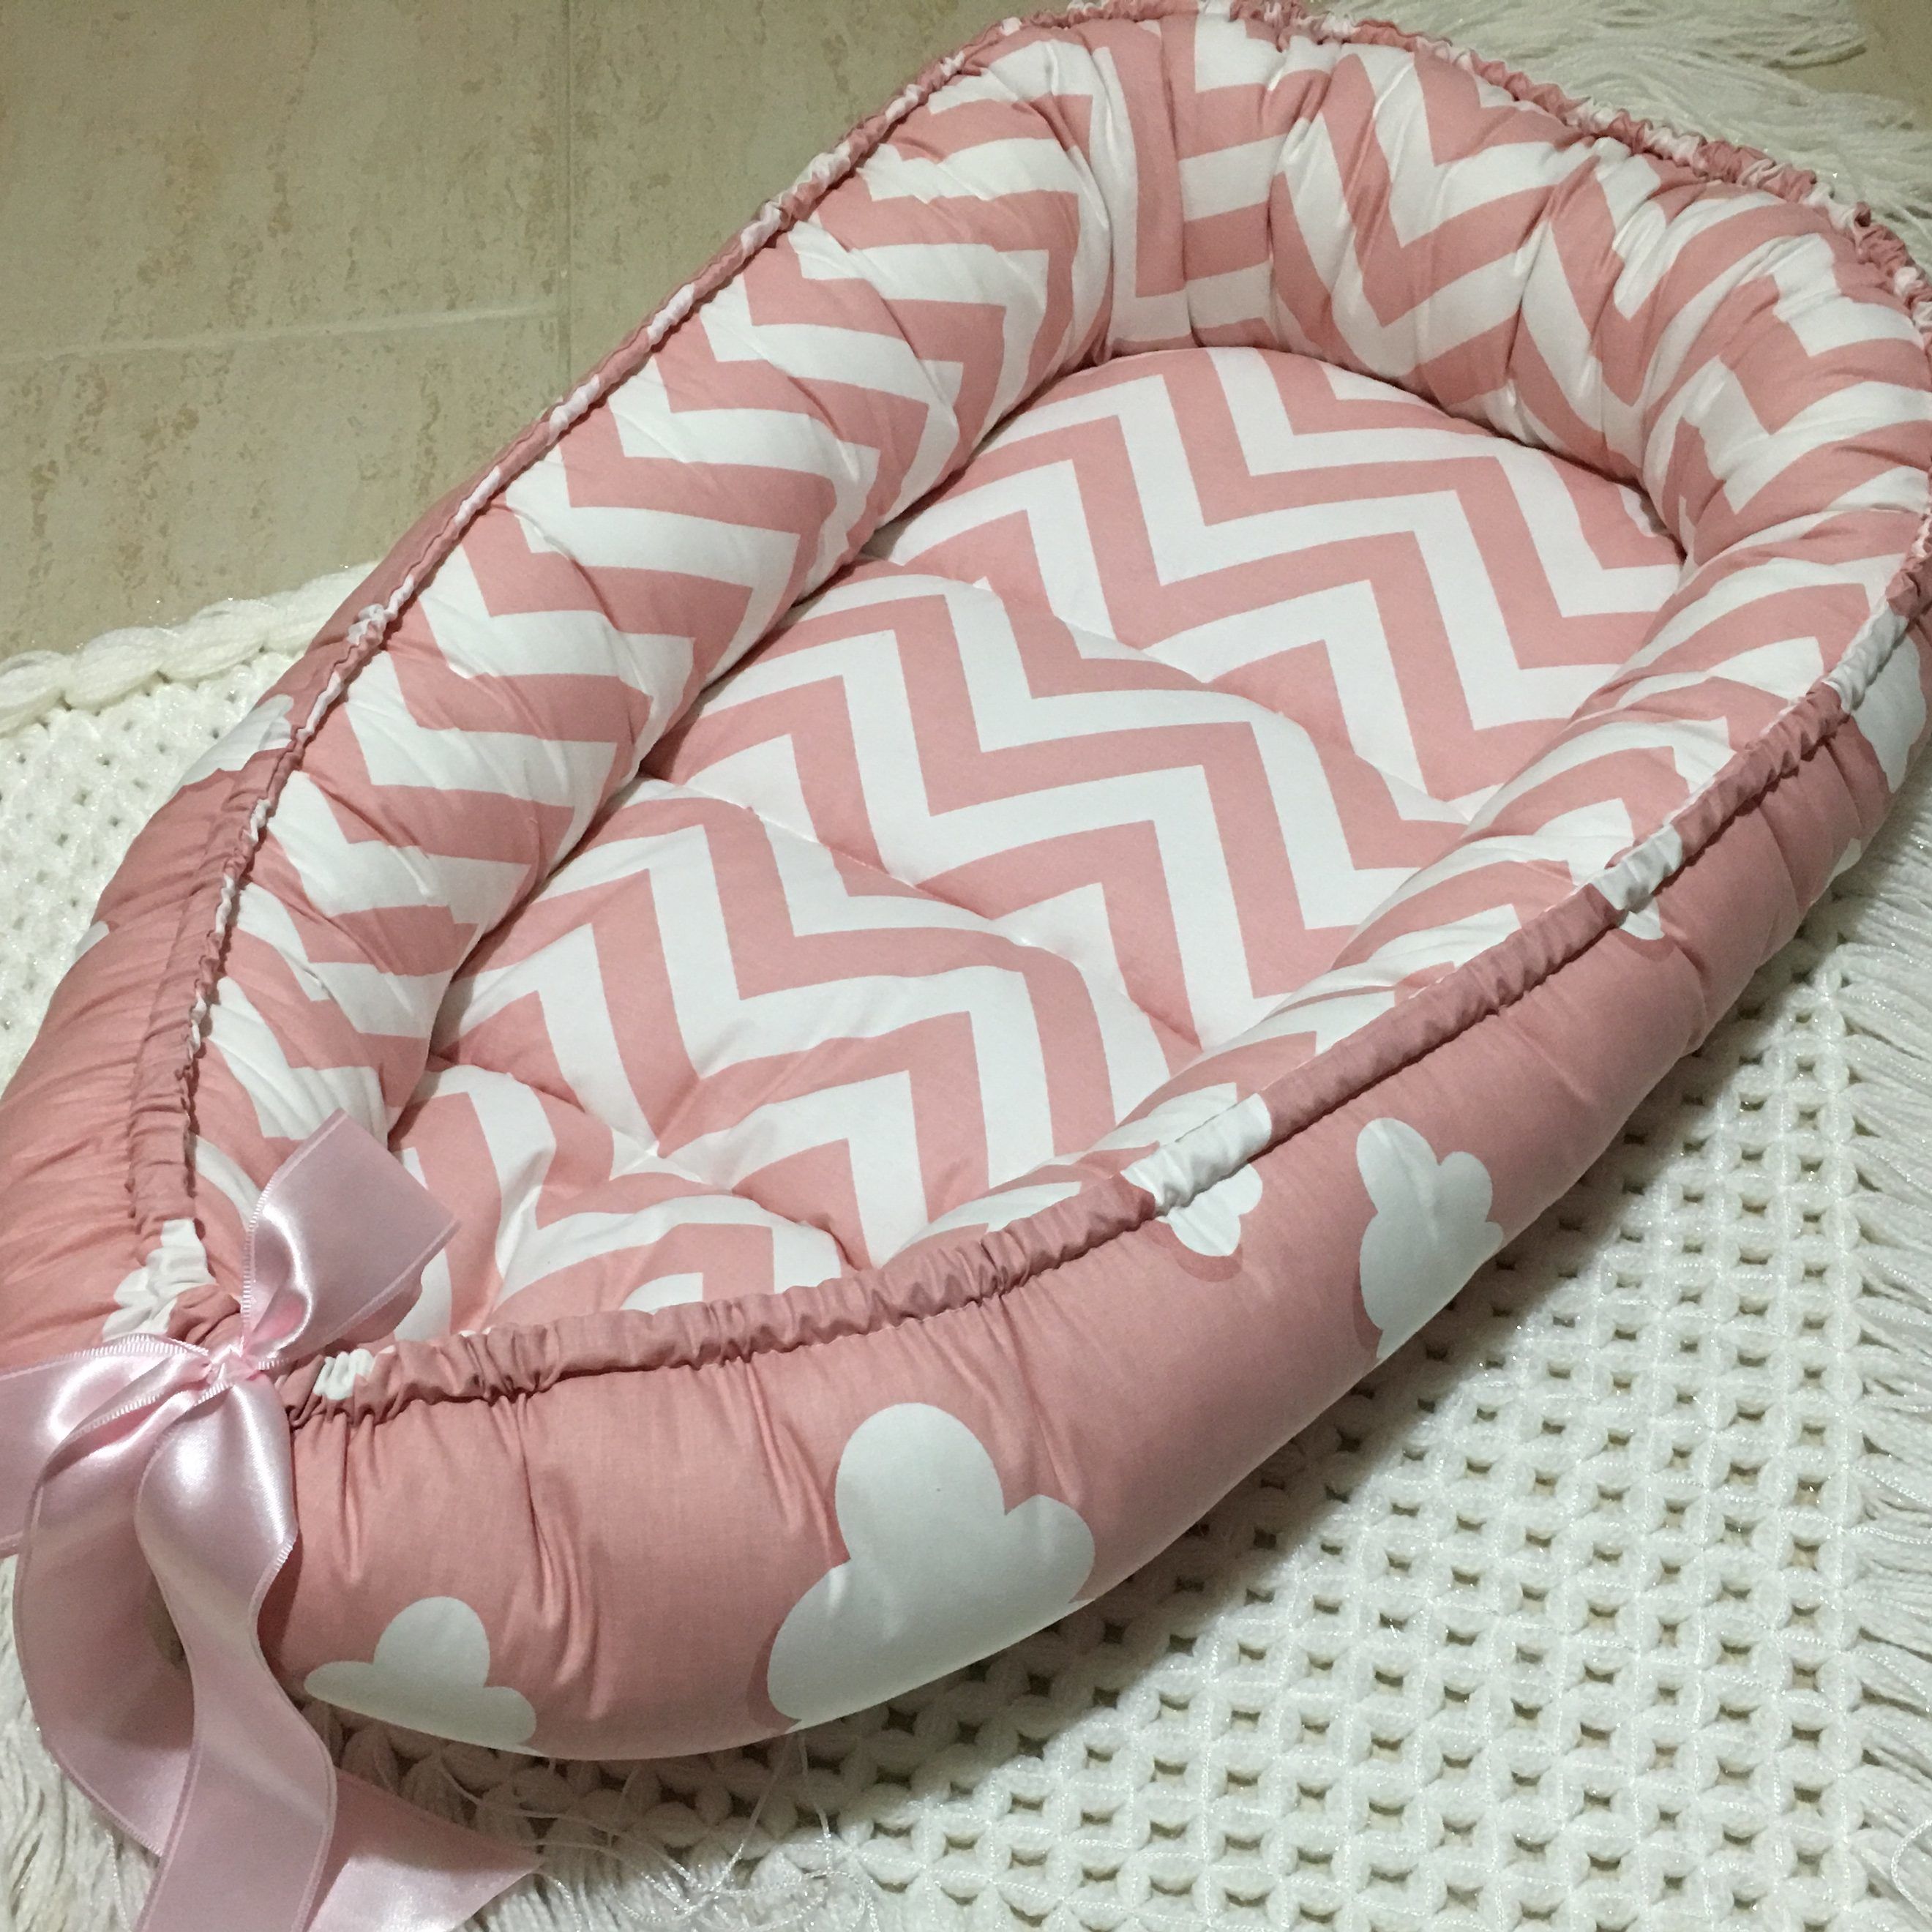 Handmade Double-sided Pink Organic Baby Nest Bed - Baby Nest Bed